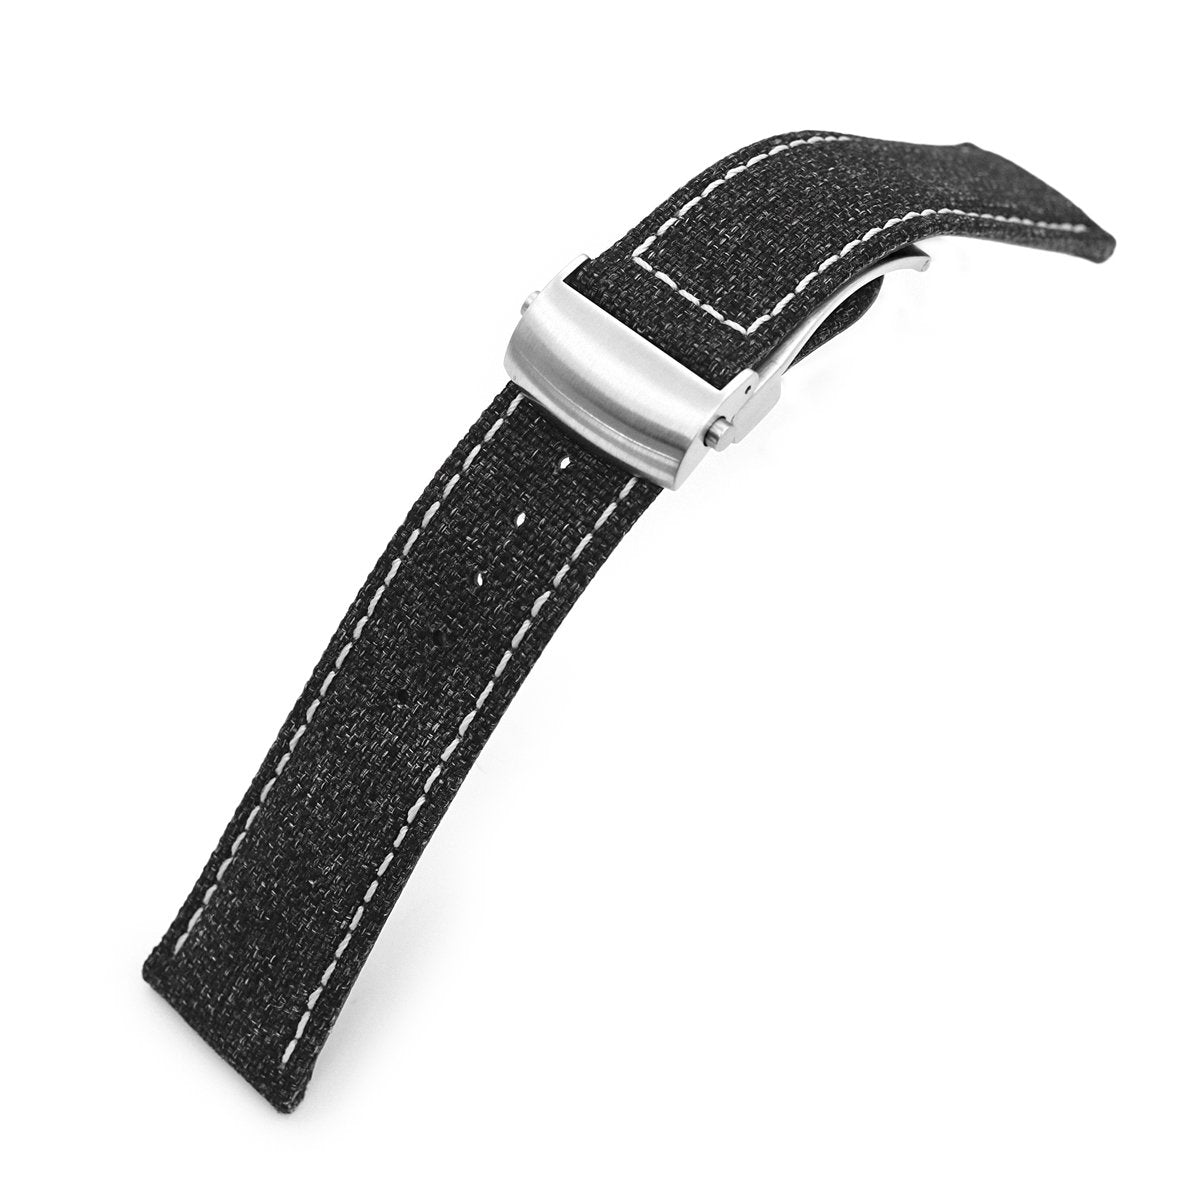 20mm or 22mm Black Canvas Watch Band Brushed Roller Deployant Buckle Beige Stitching Strapcode Watch Bands